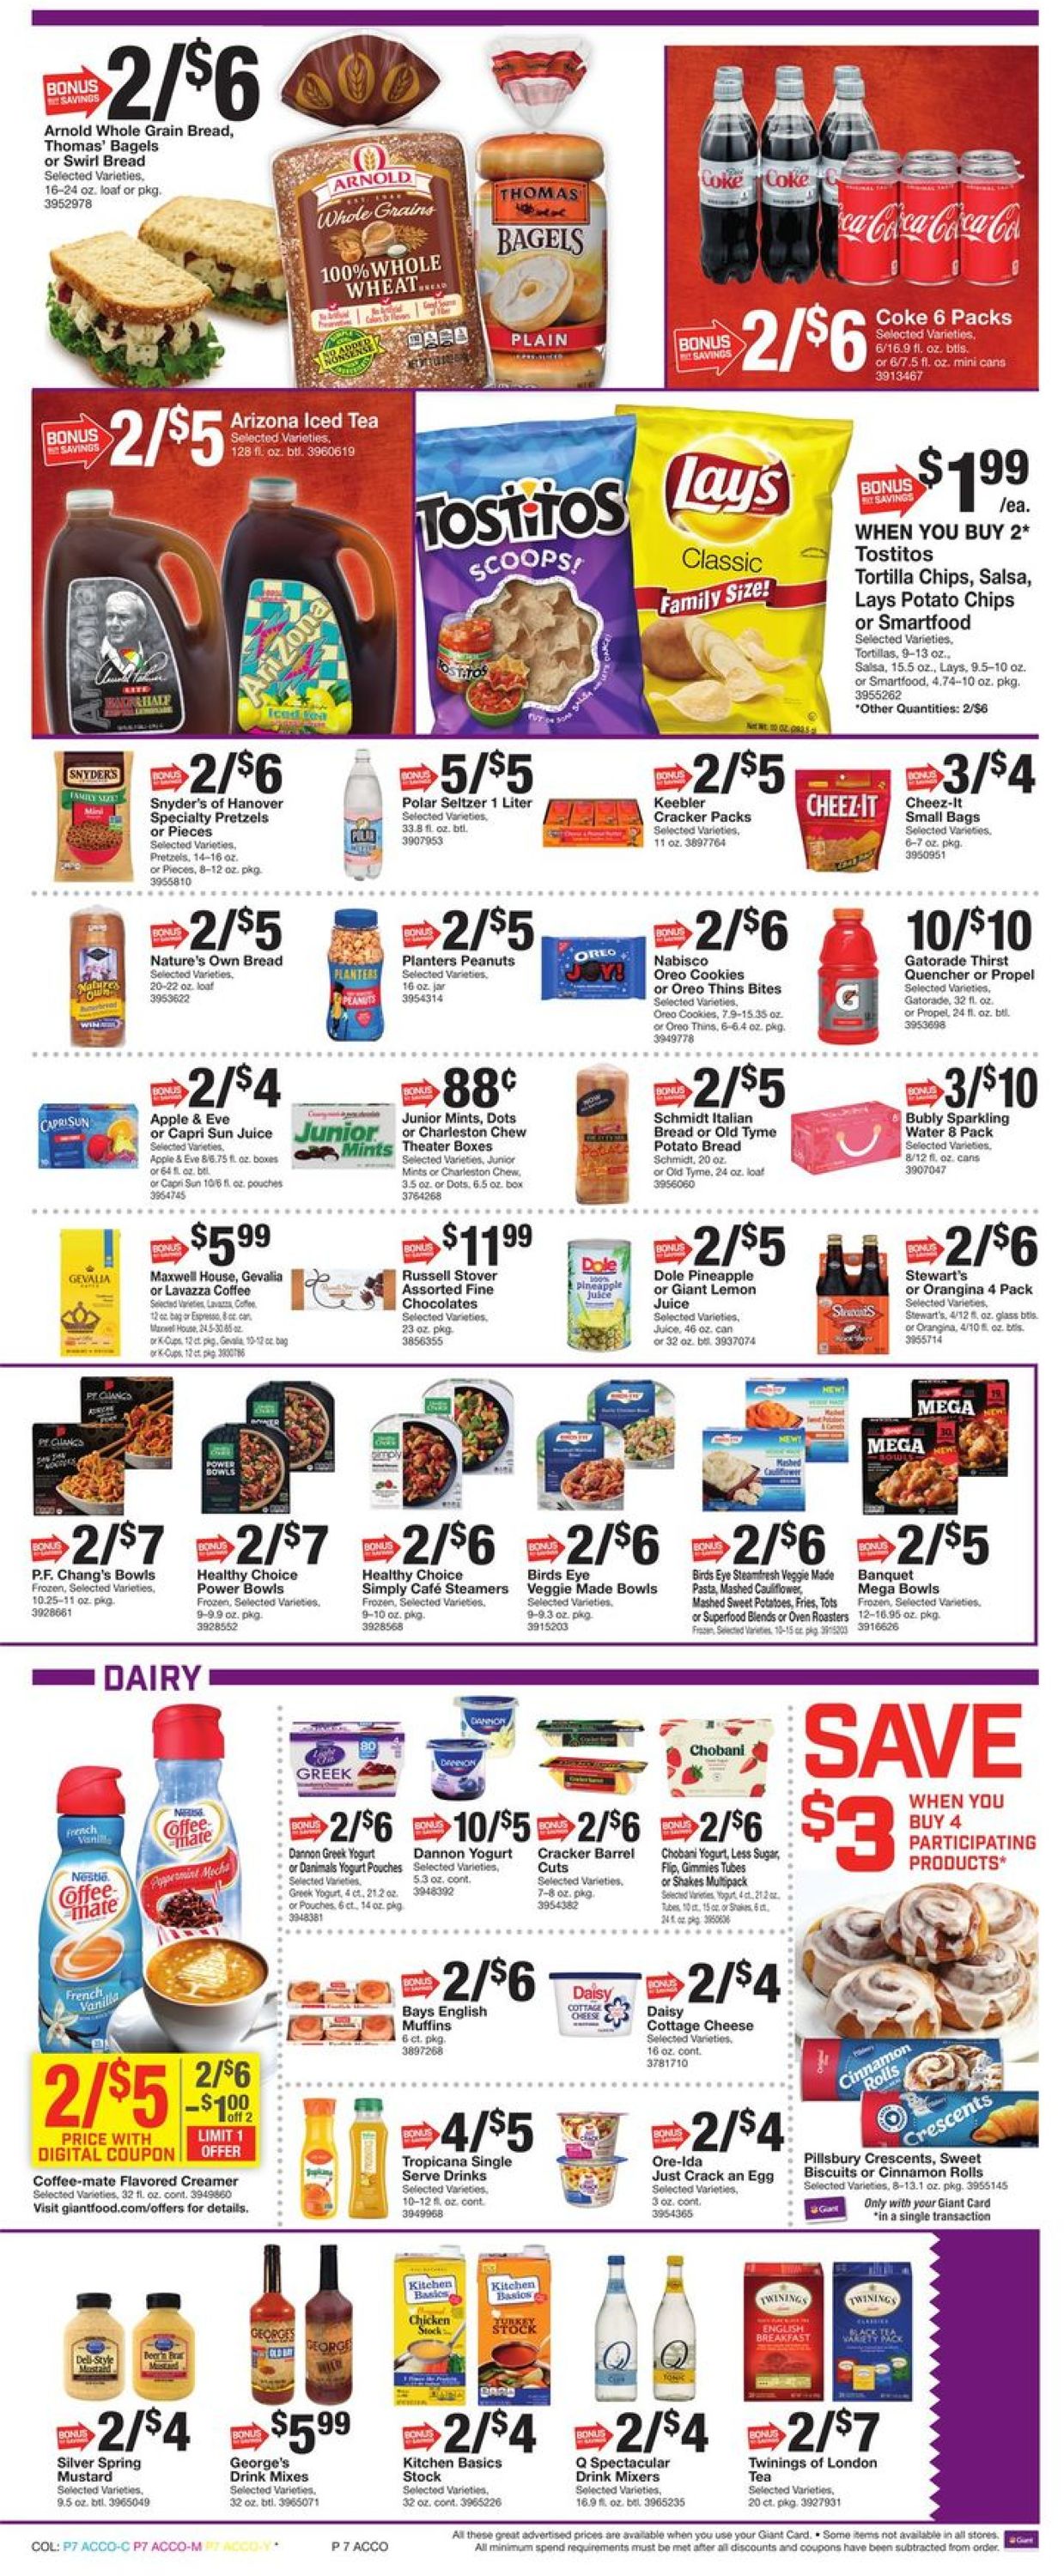 Giant Food - Thanksgiving Ad 2019 Weekly Ad Circular - valid 11/22-11/28/2019 (Page 11)